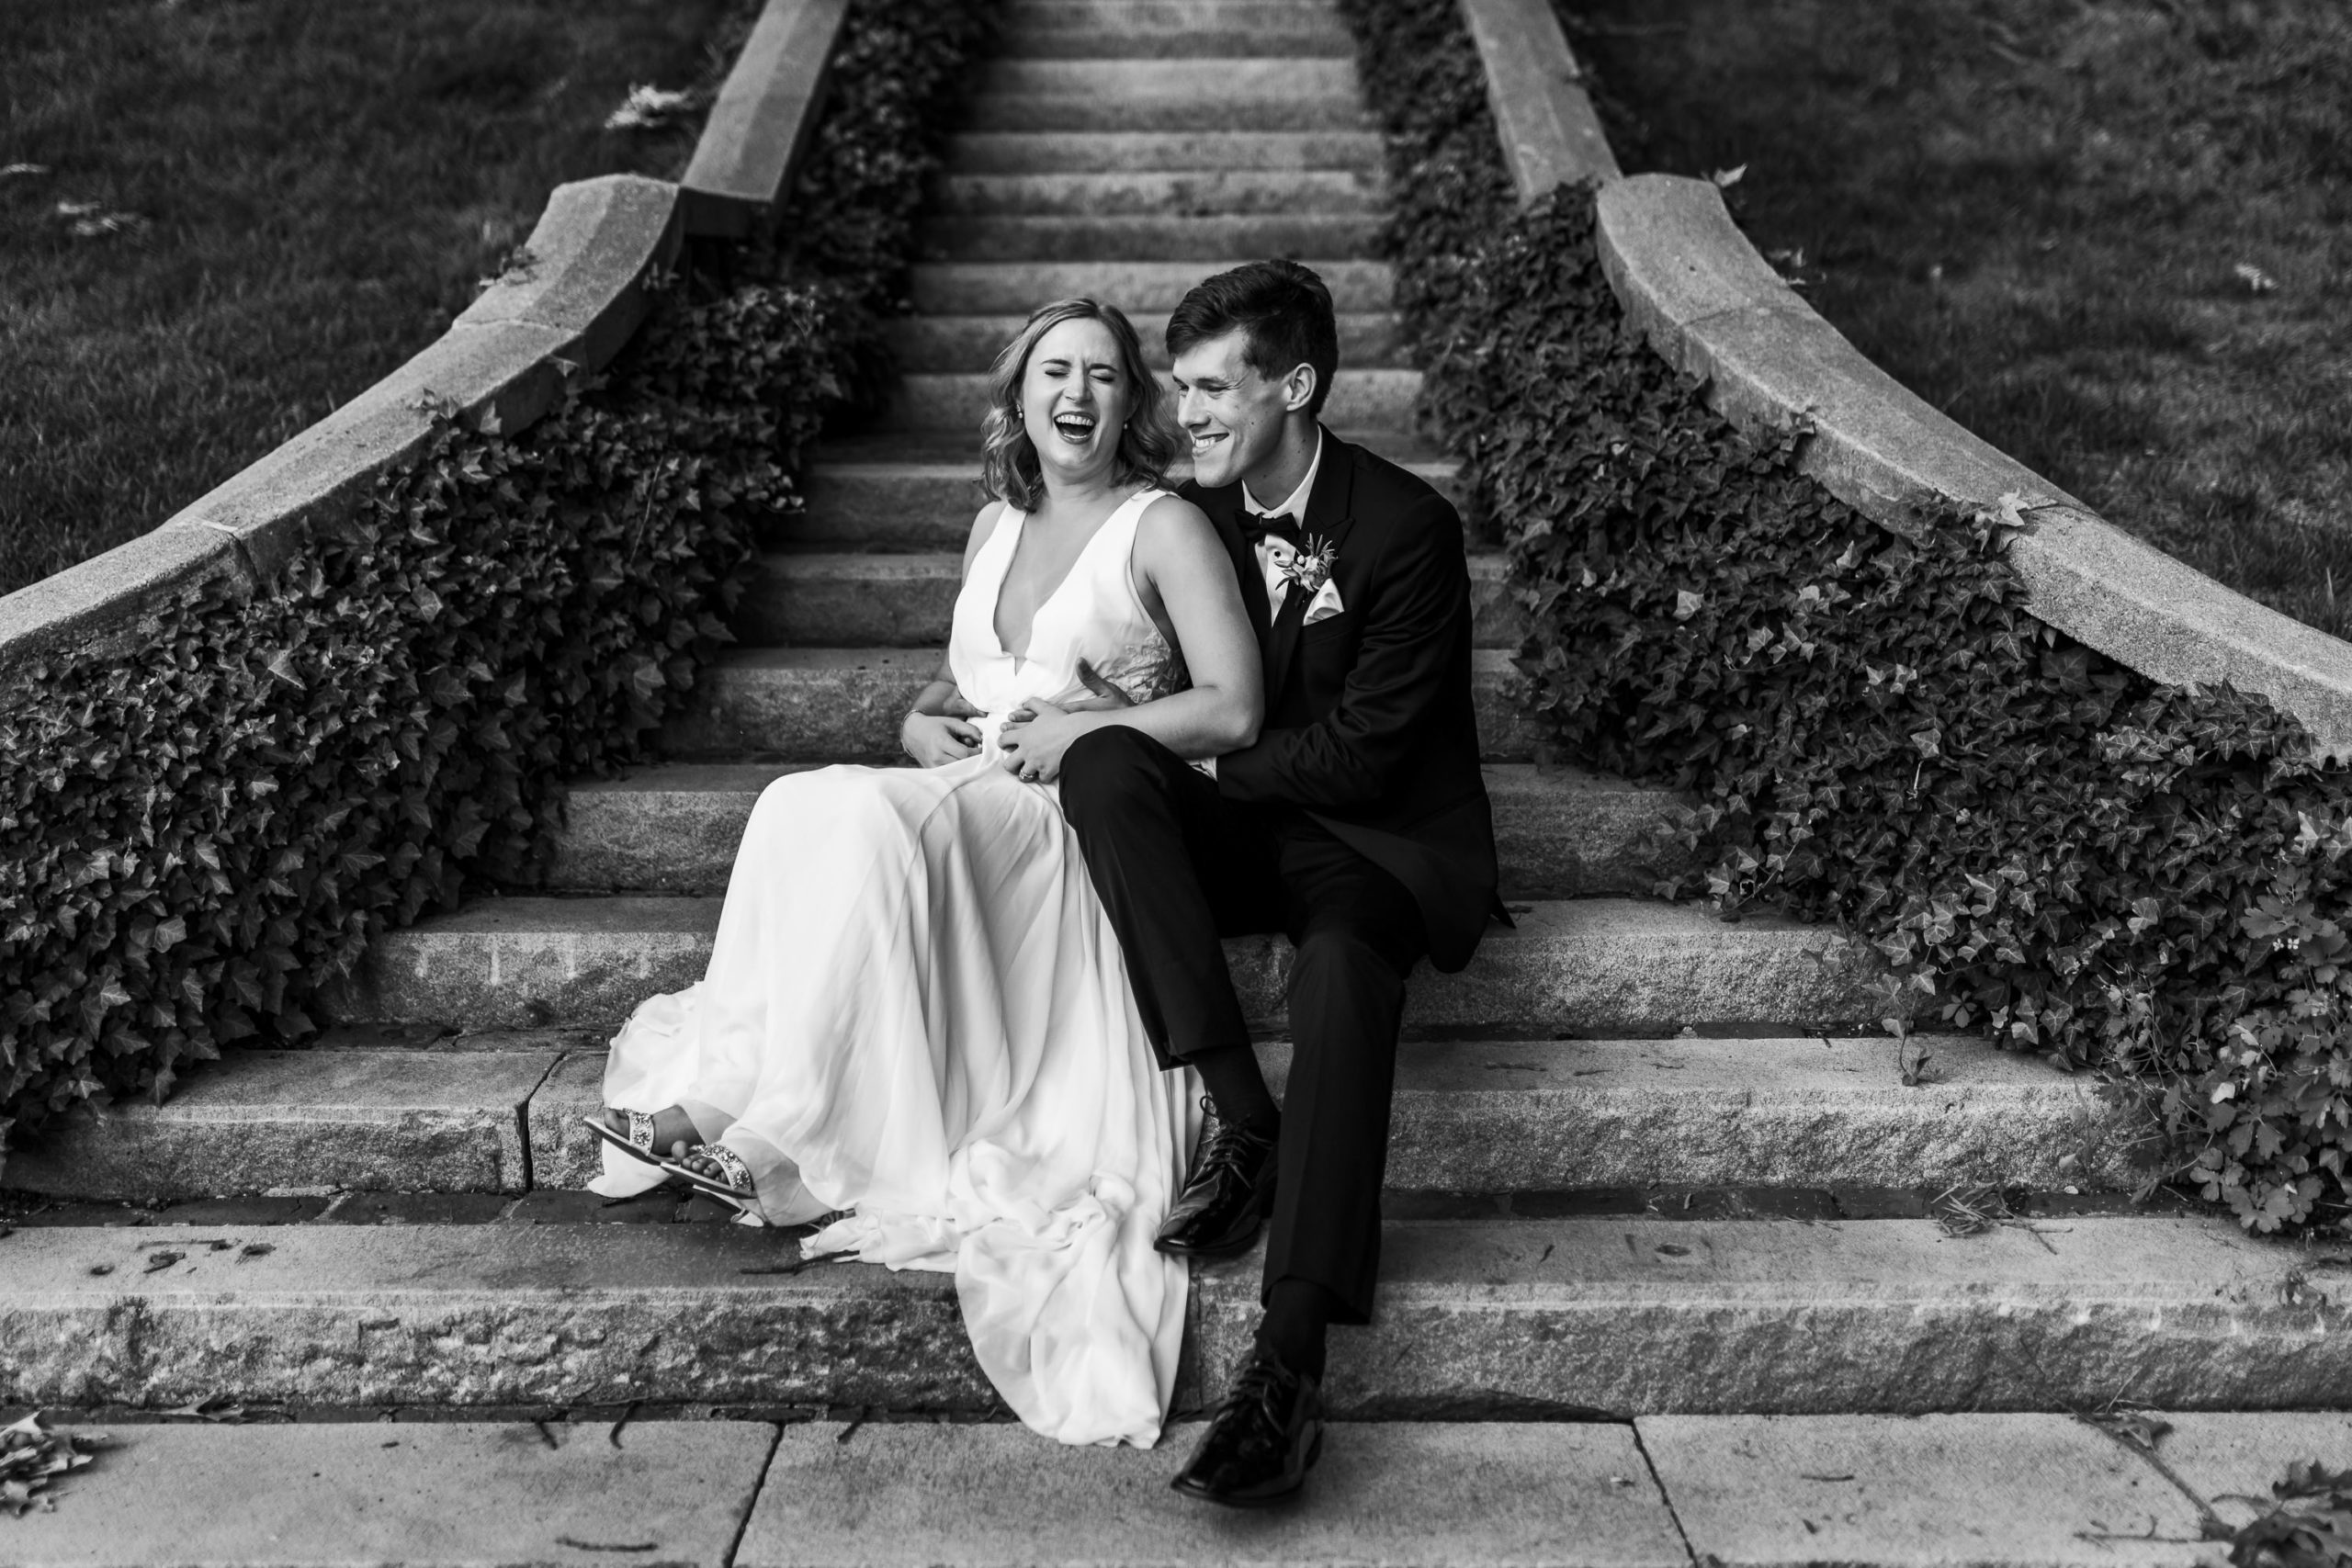 black and white portrait of bride and groom sitting on steps laughing together